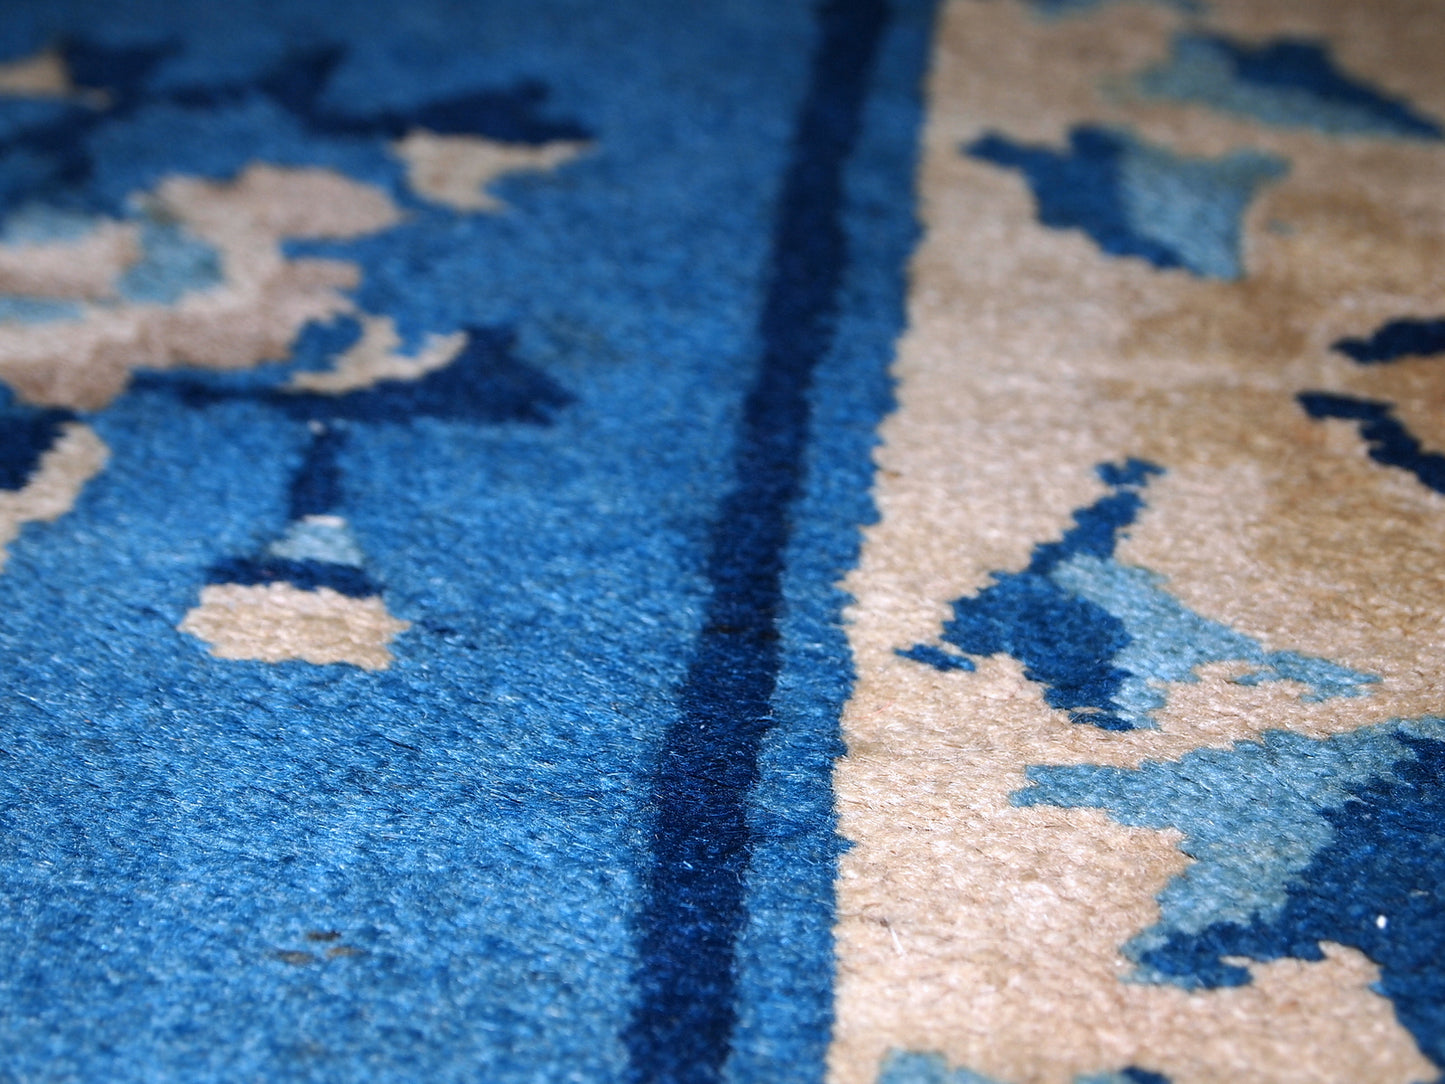 Detailed view of the antique rug's cultural history.